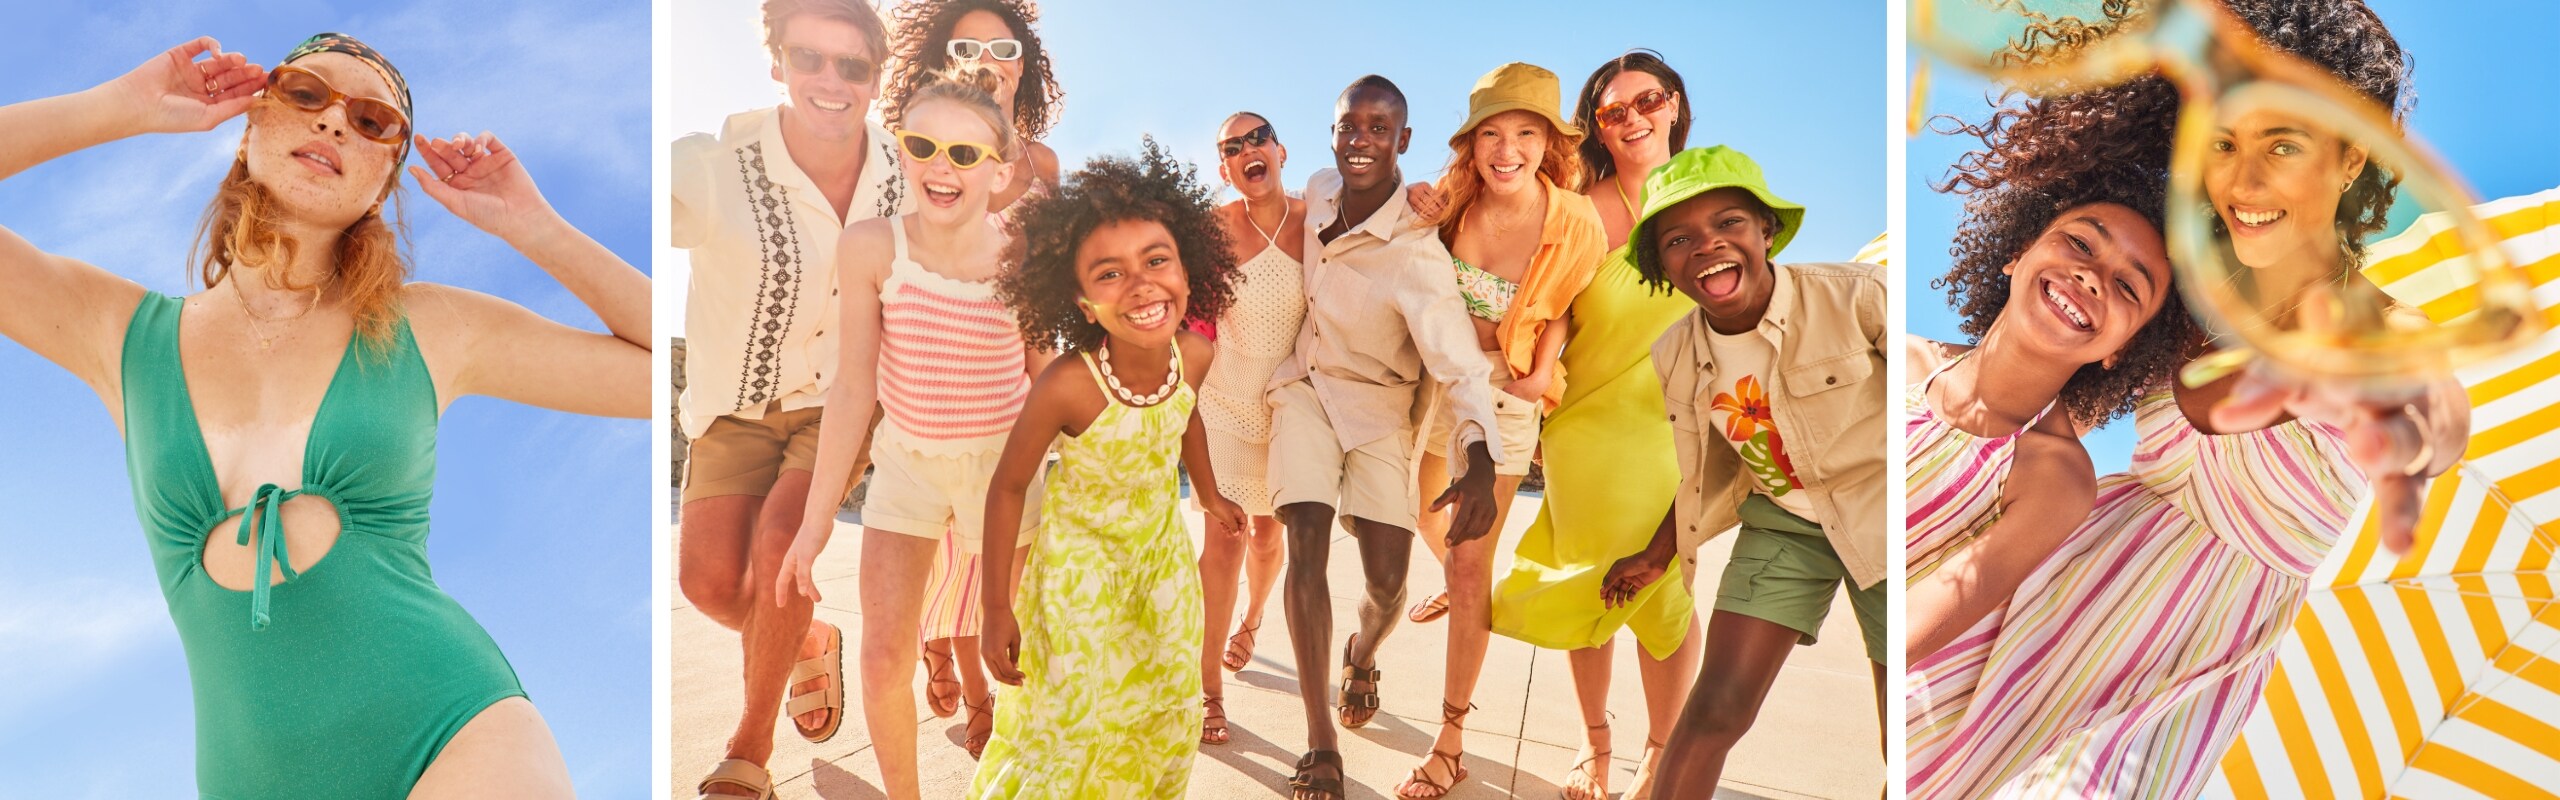 A group of friends and family standing on a sunny beach wearing dresses, shorts, graphic tees, sandals, and more.